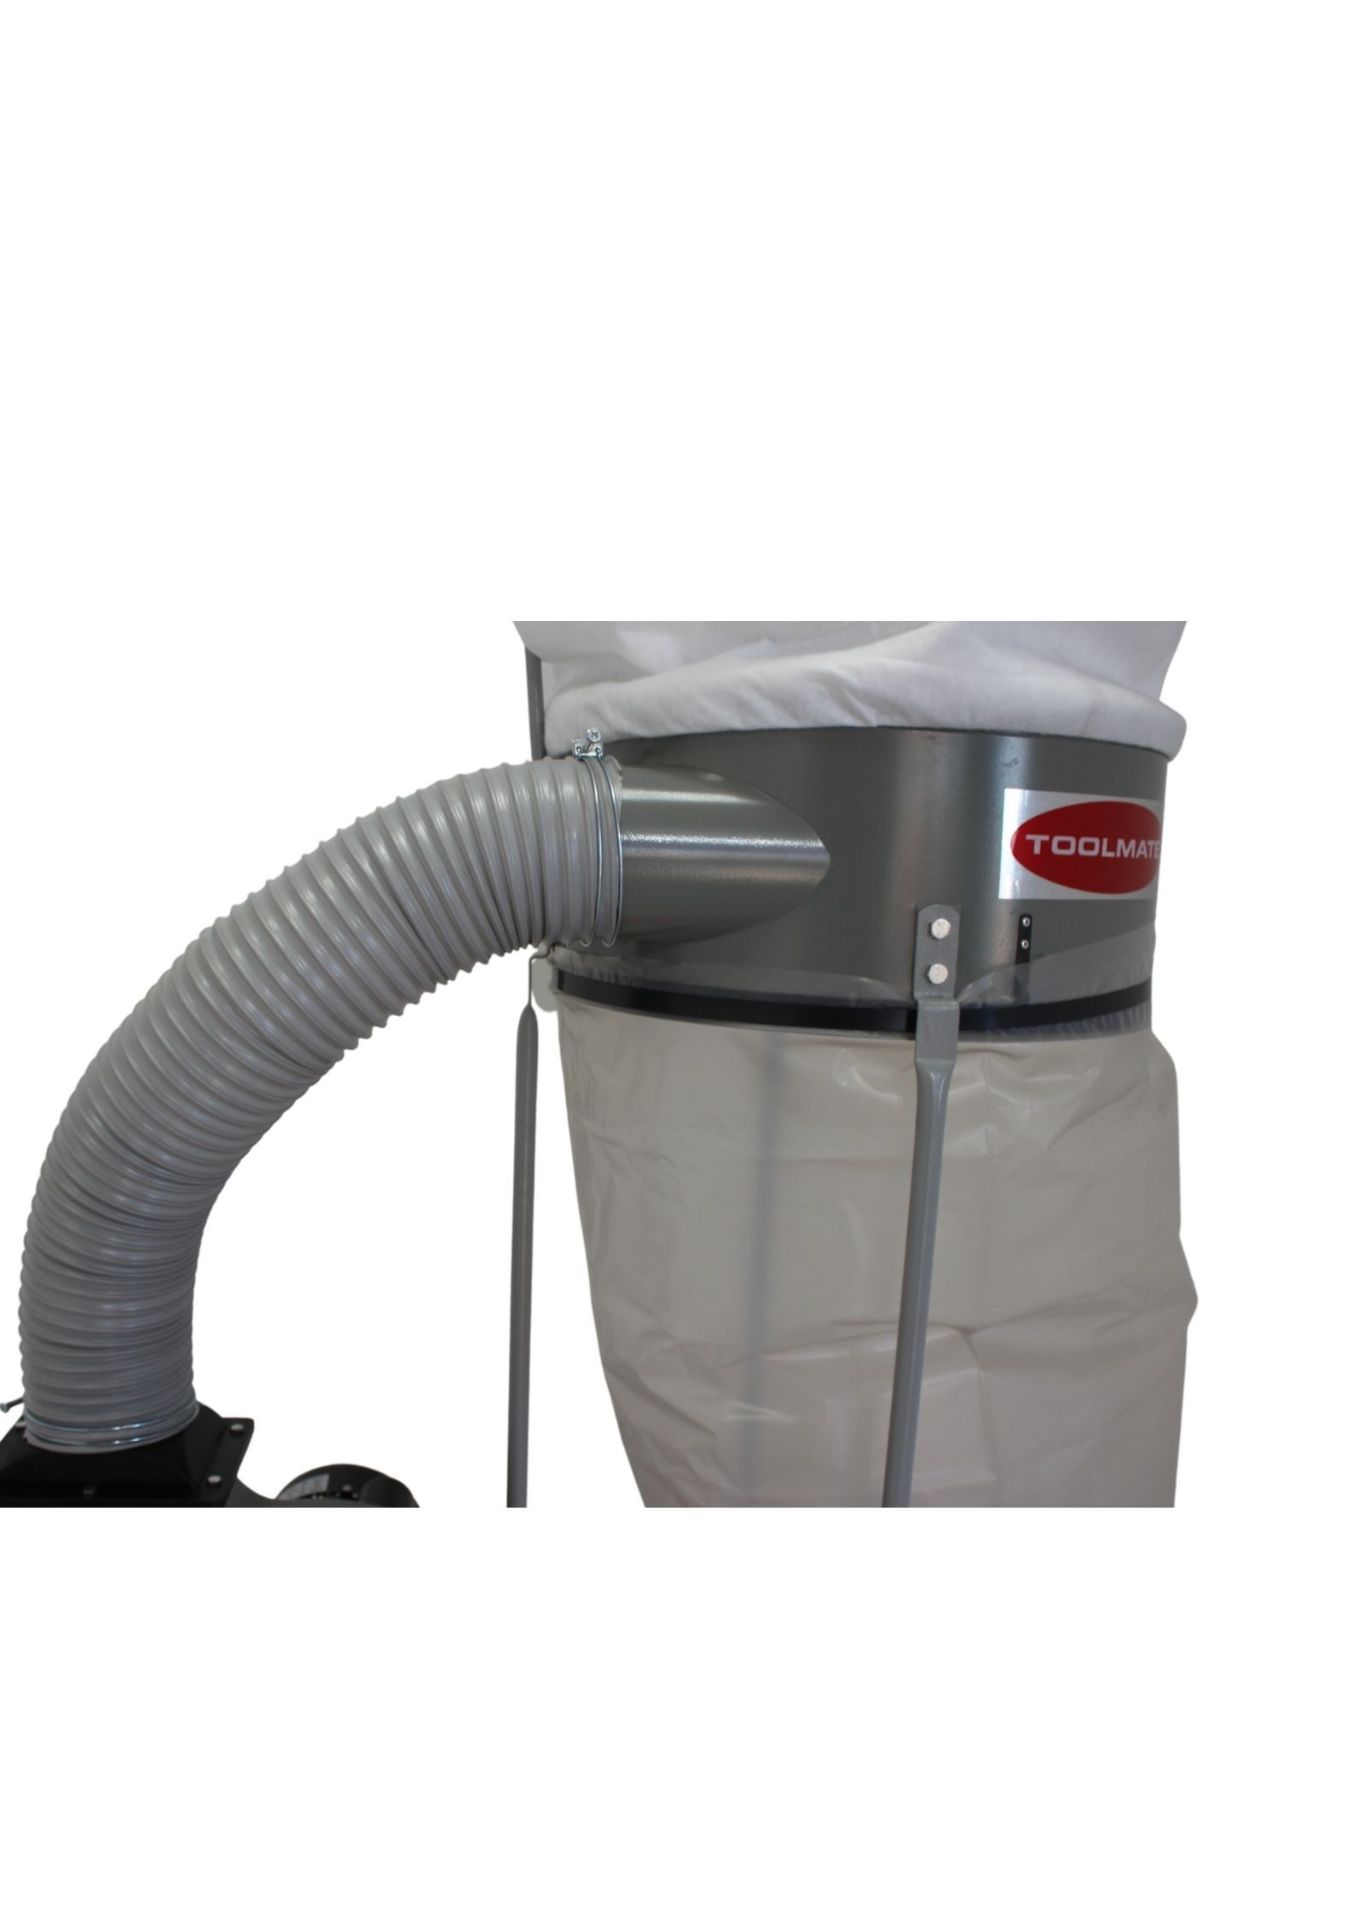 Toolmate Single Bag Dust Extractor FM300 | Buy Online in South Africa ...